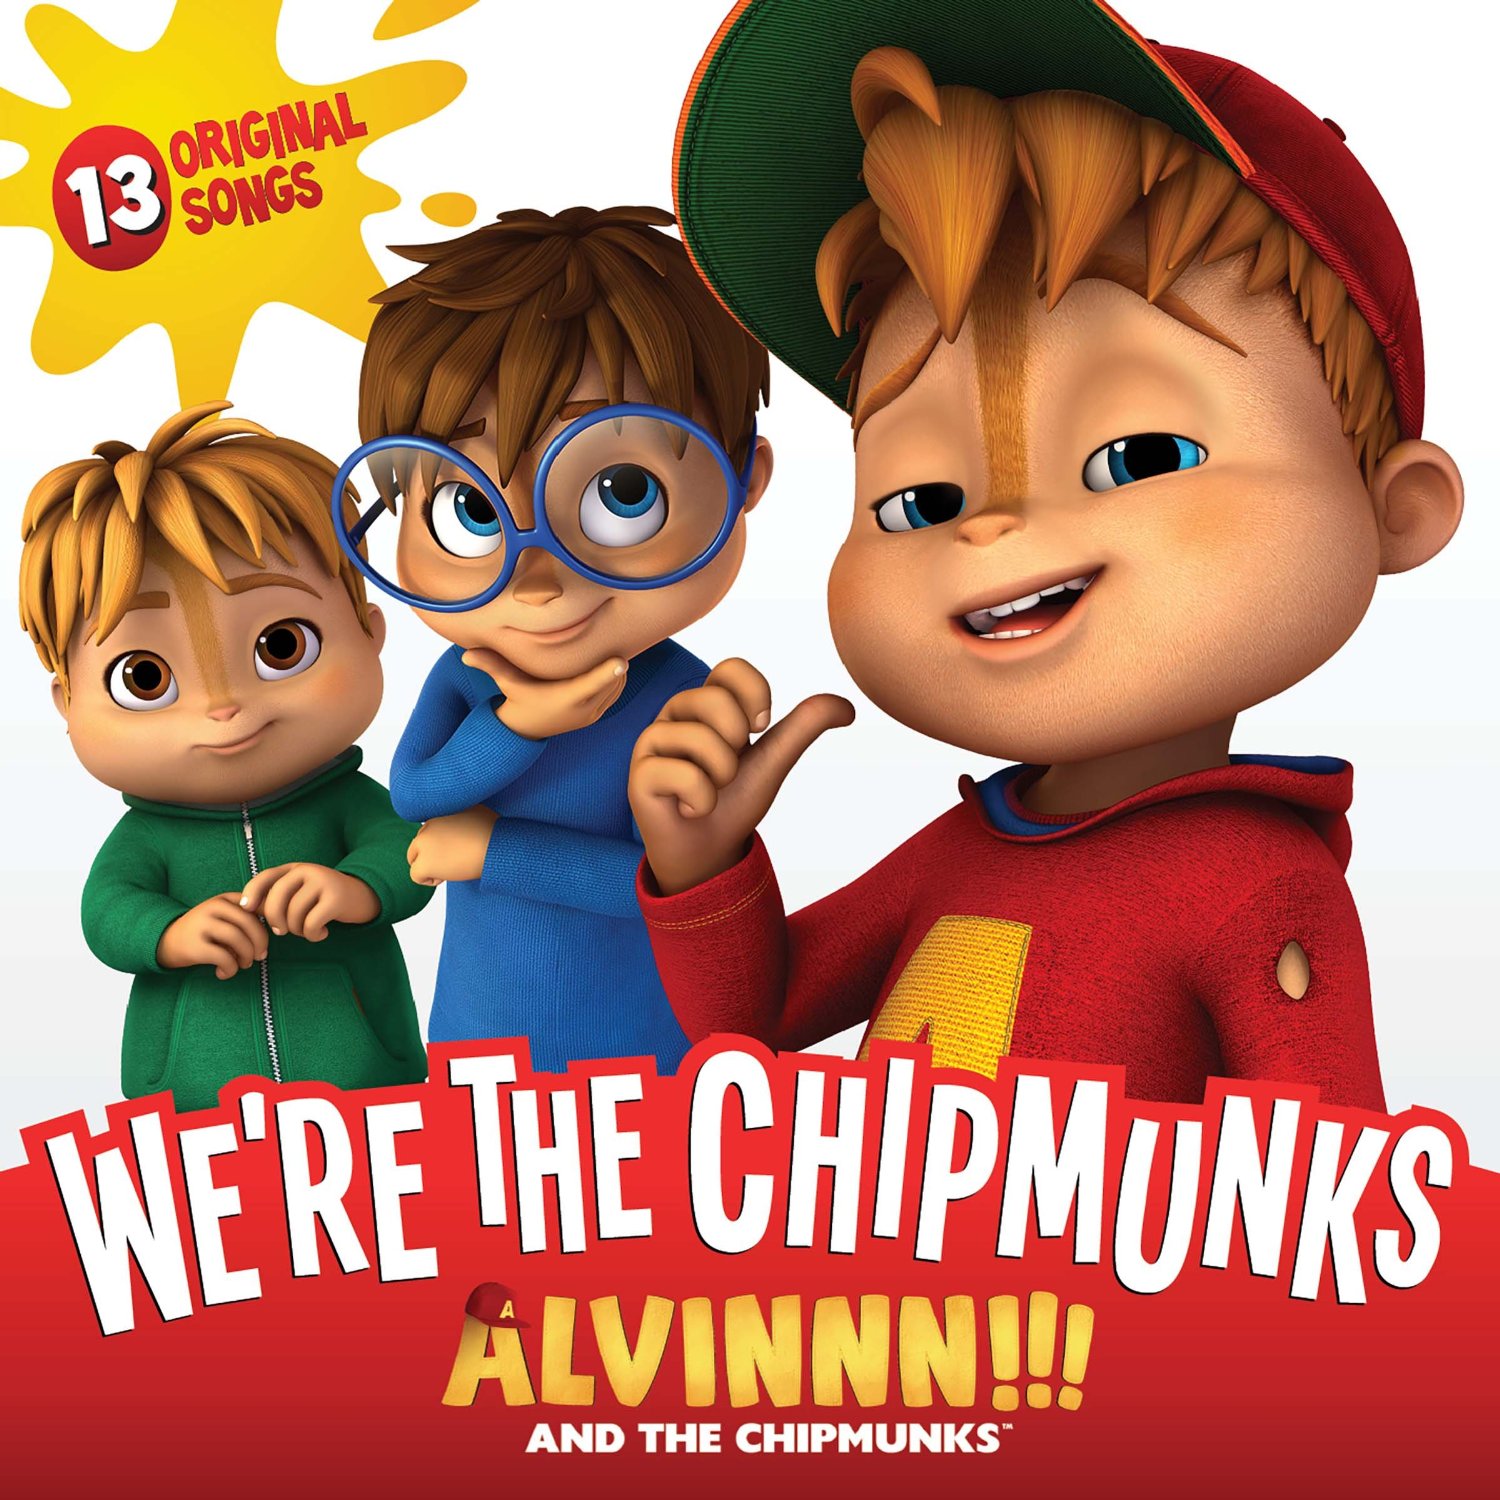 And the Chipmunks: We're the Chipmunks.